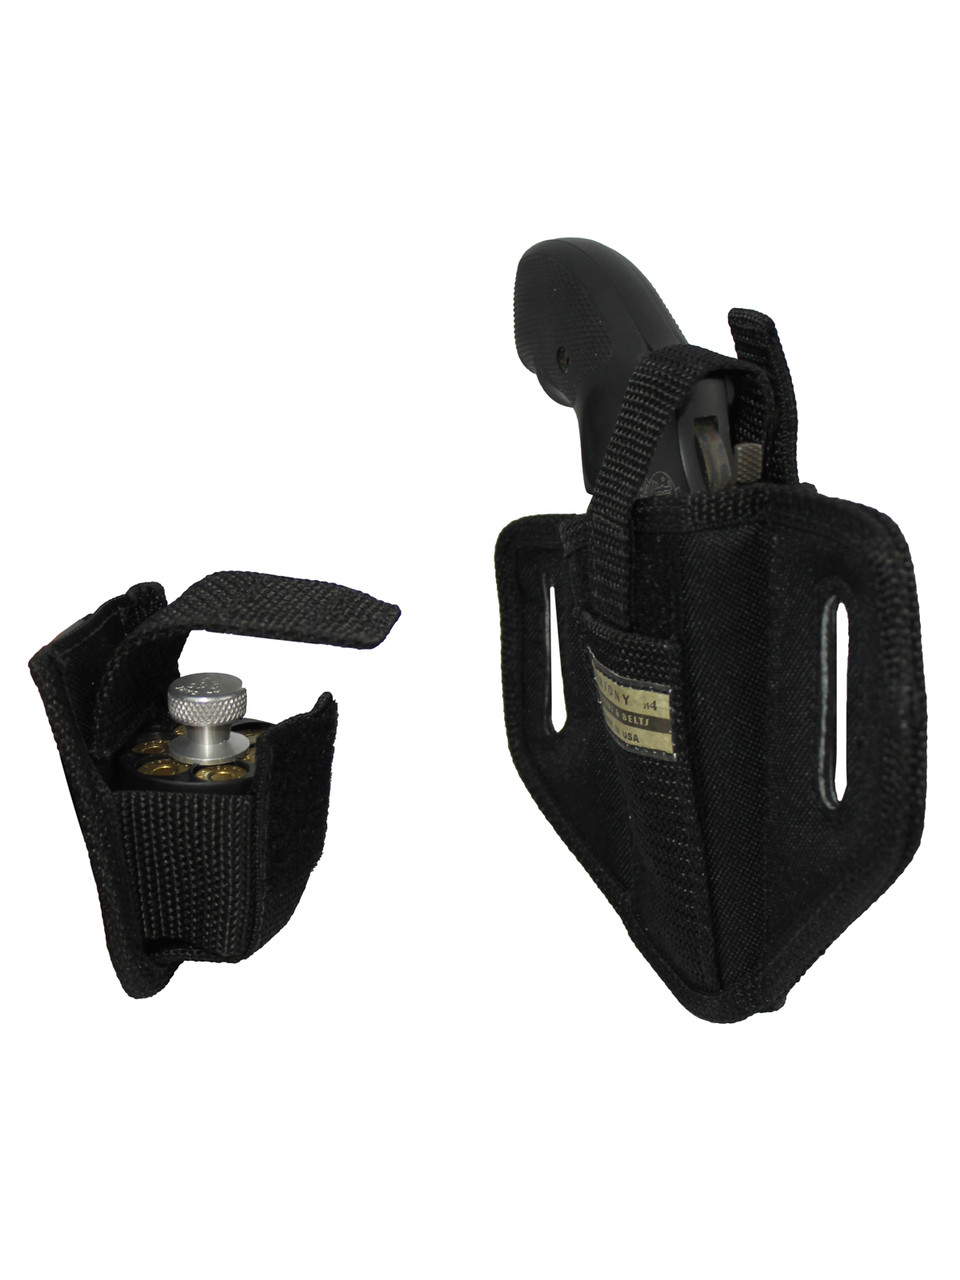 6 Position Ambidextrous Pancake Holster + Speed-loader Pouch for 2" Snub Nose Revolvers